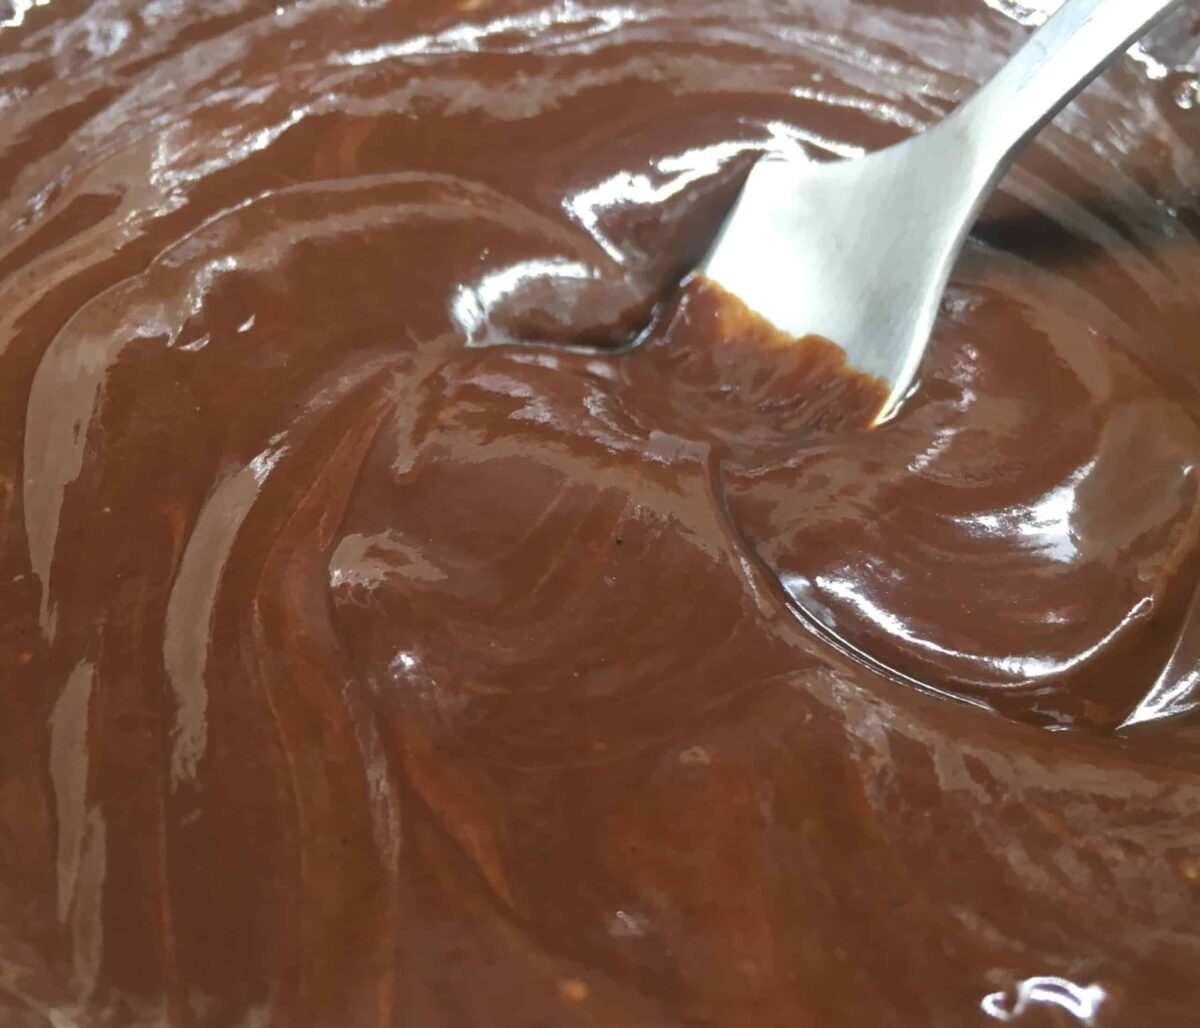 Melted chocolate for dipping.